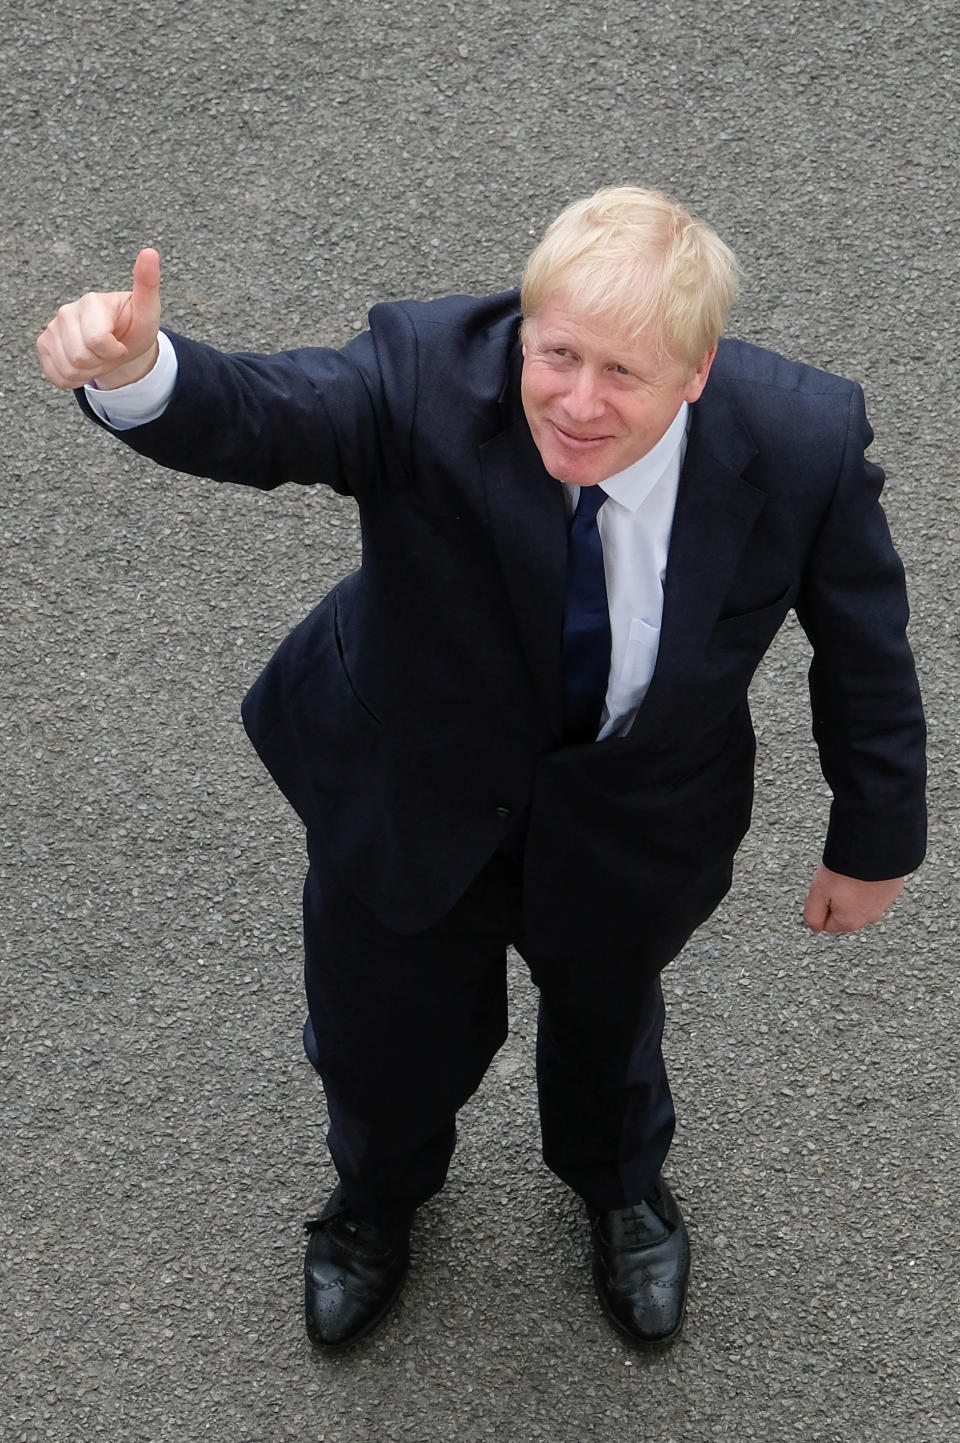 Conservative party leadership contender Boris Johnson arrives to speak at a Tory leadership hustings at Carlisle Racecourse.